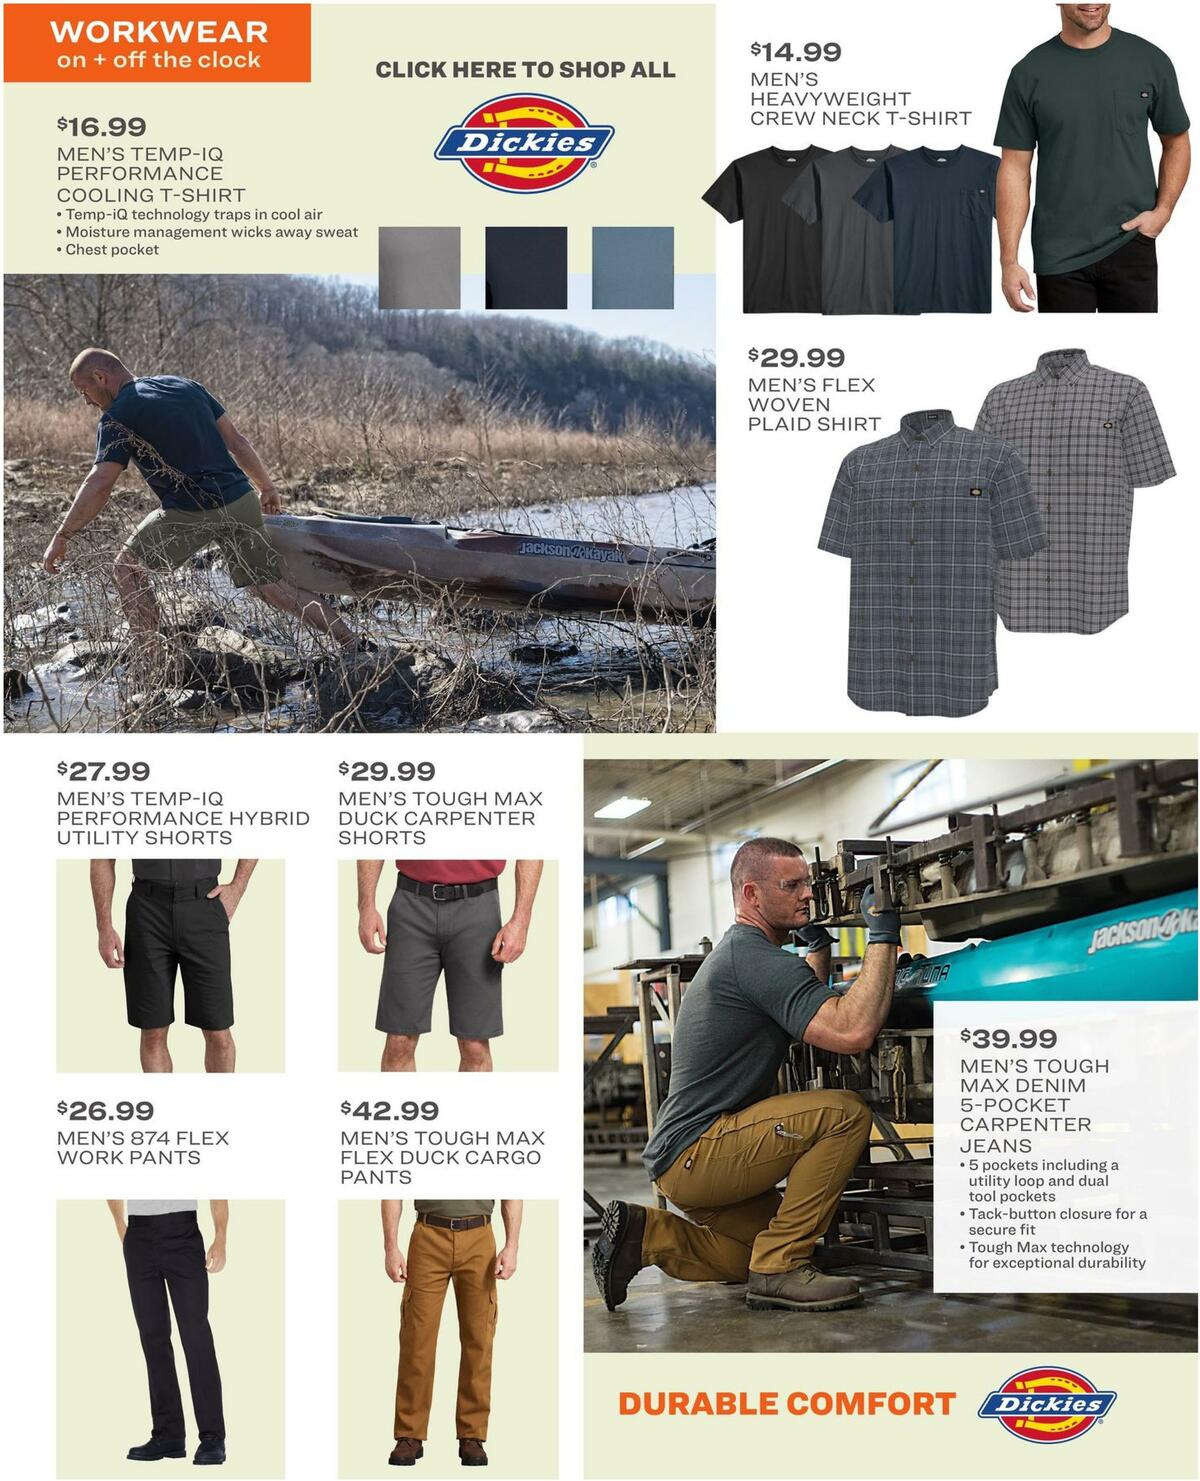 Academy Sports + Outdoors Spring Workwear Guide Weekly Ad from March 8